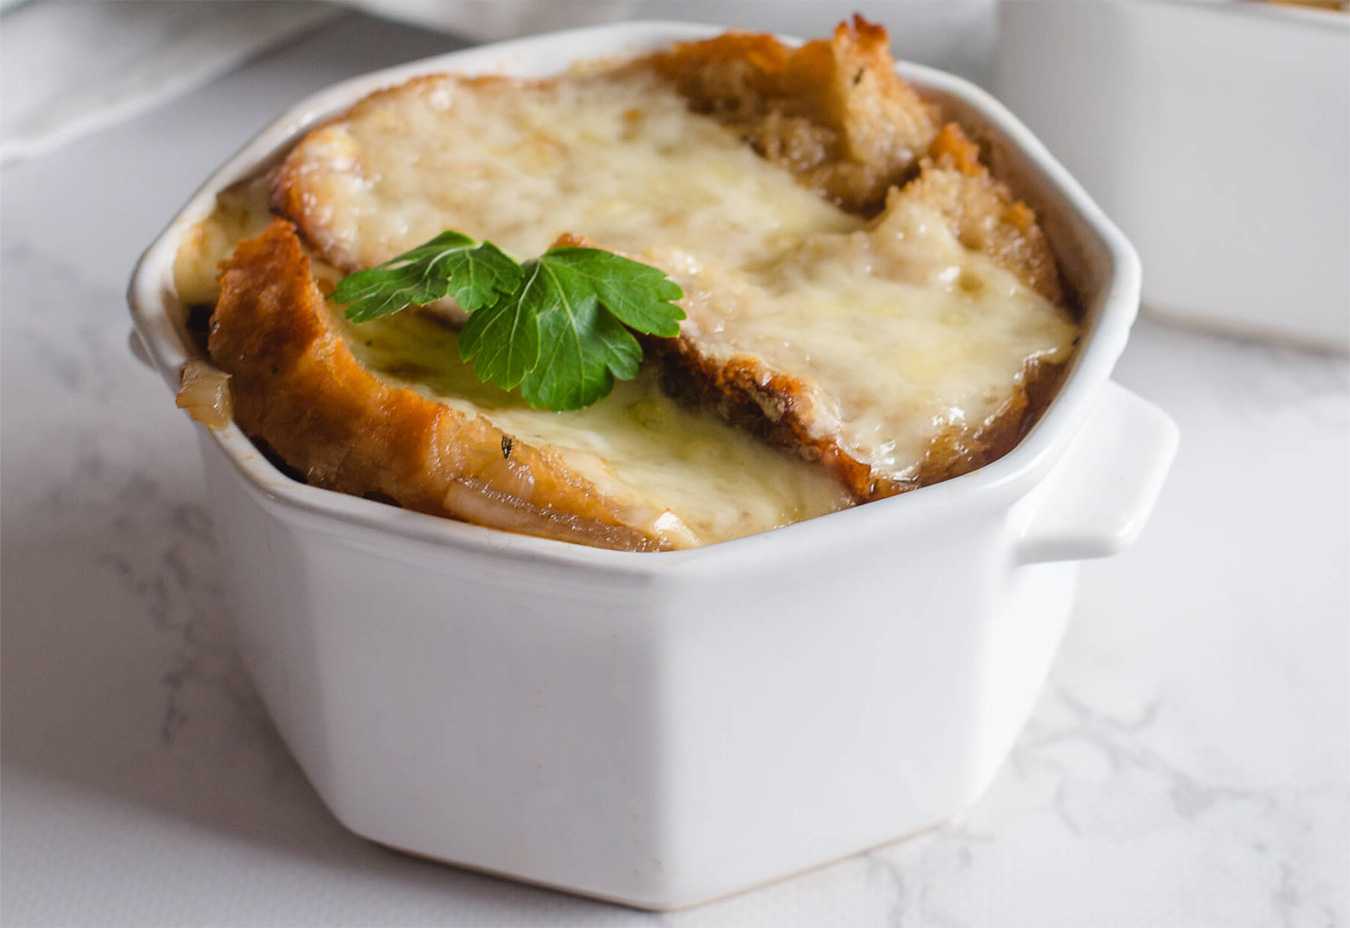 Onion soup topped with baguette slices, melted cheese and parsley